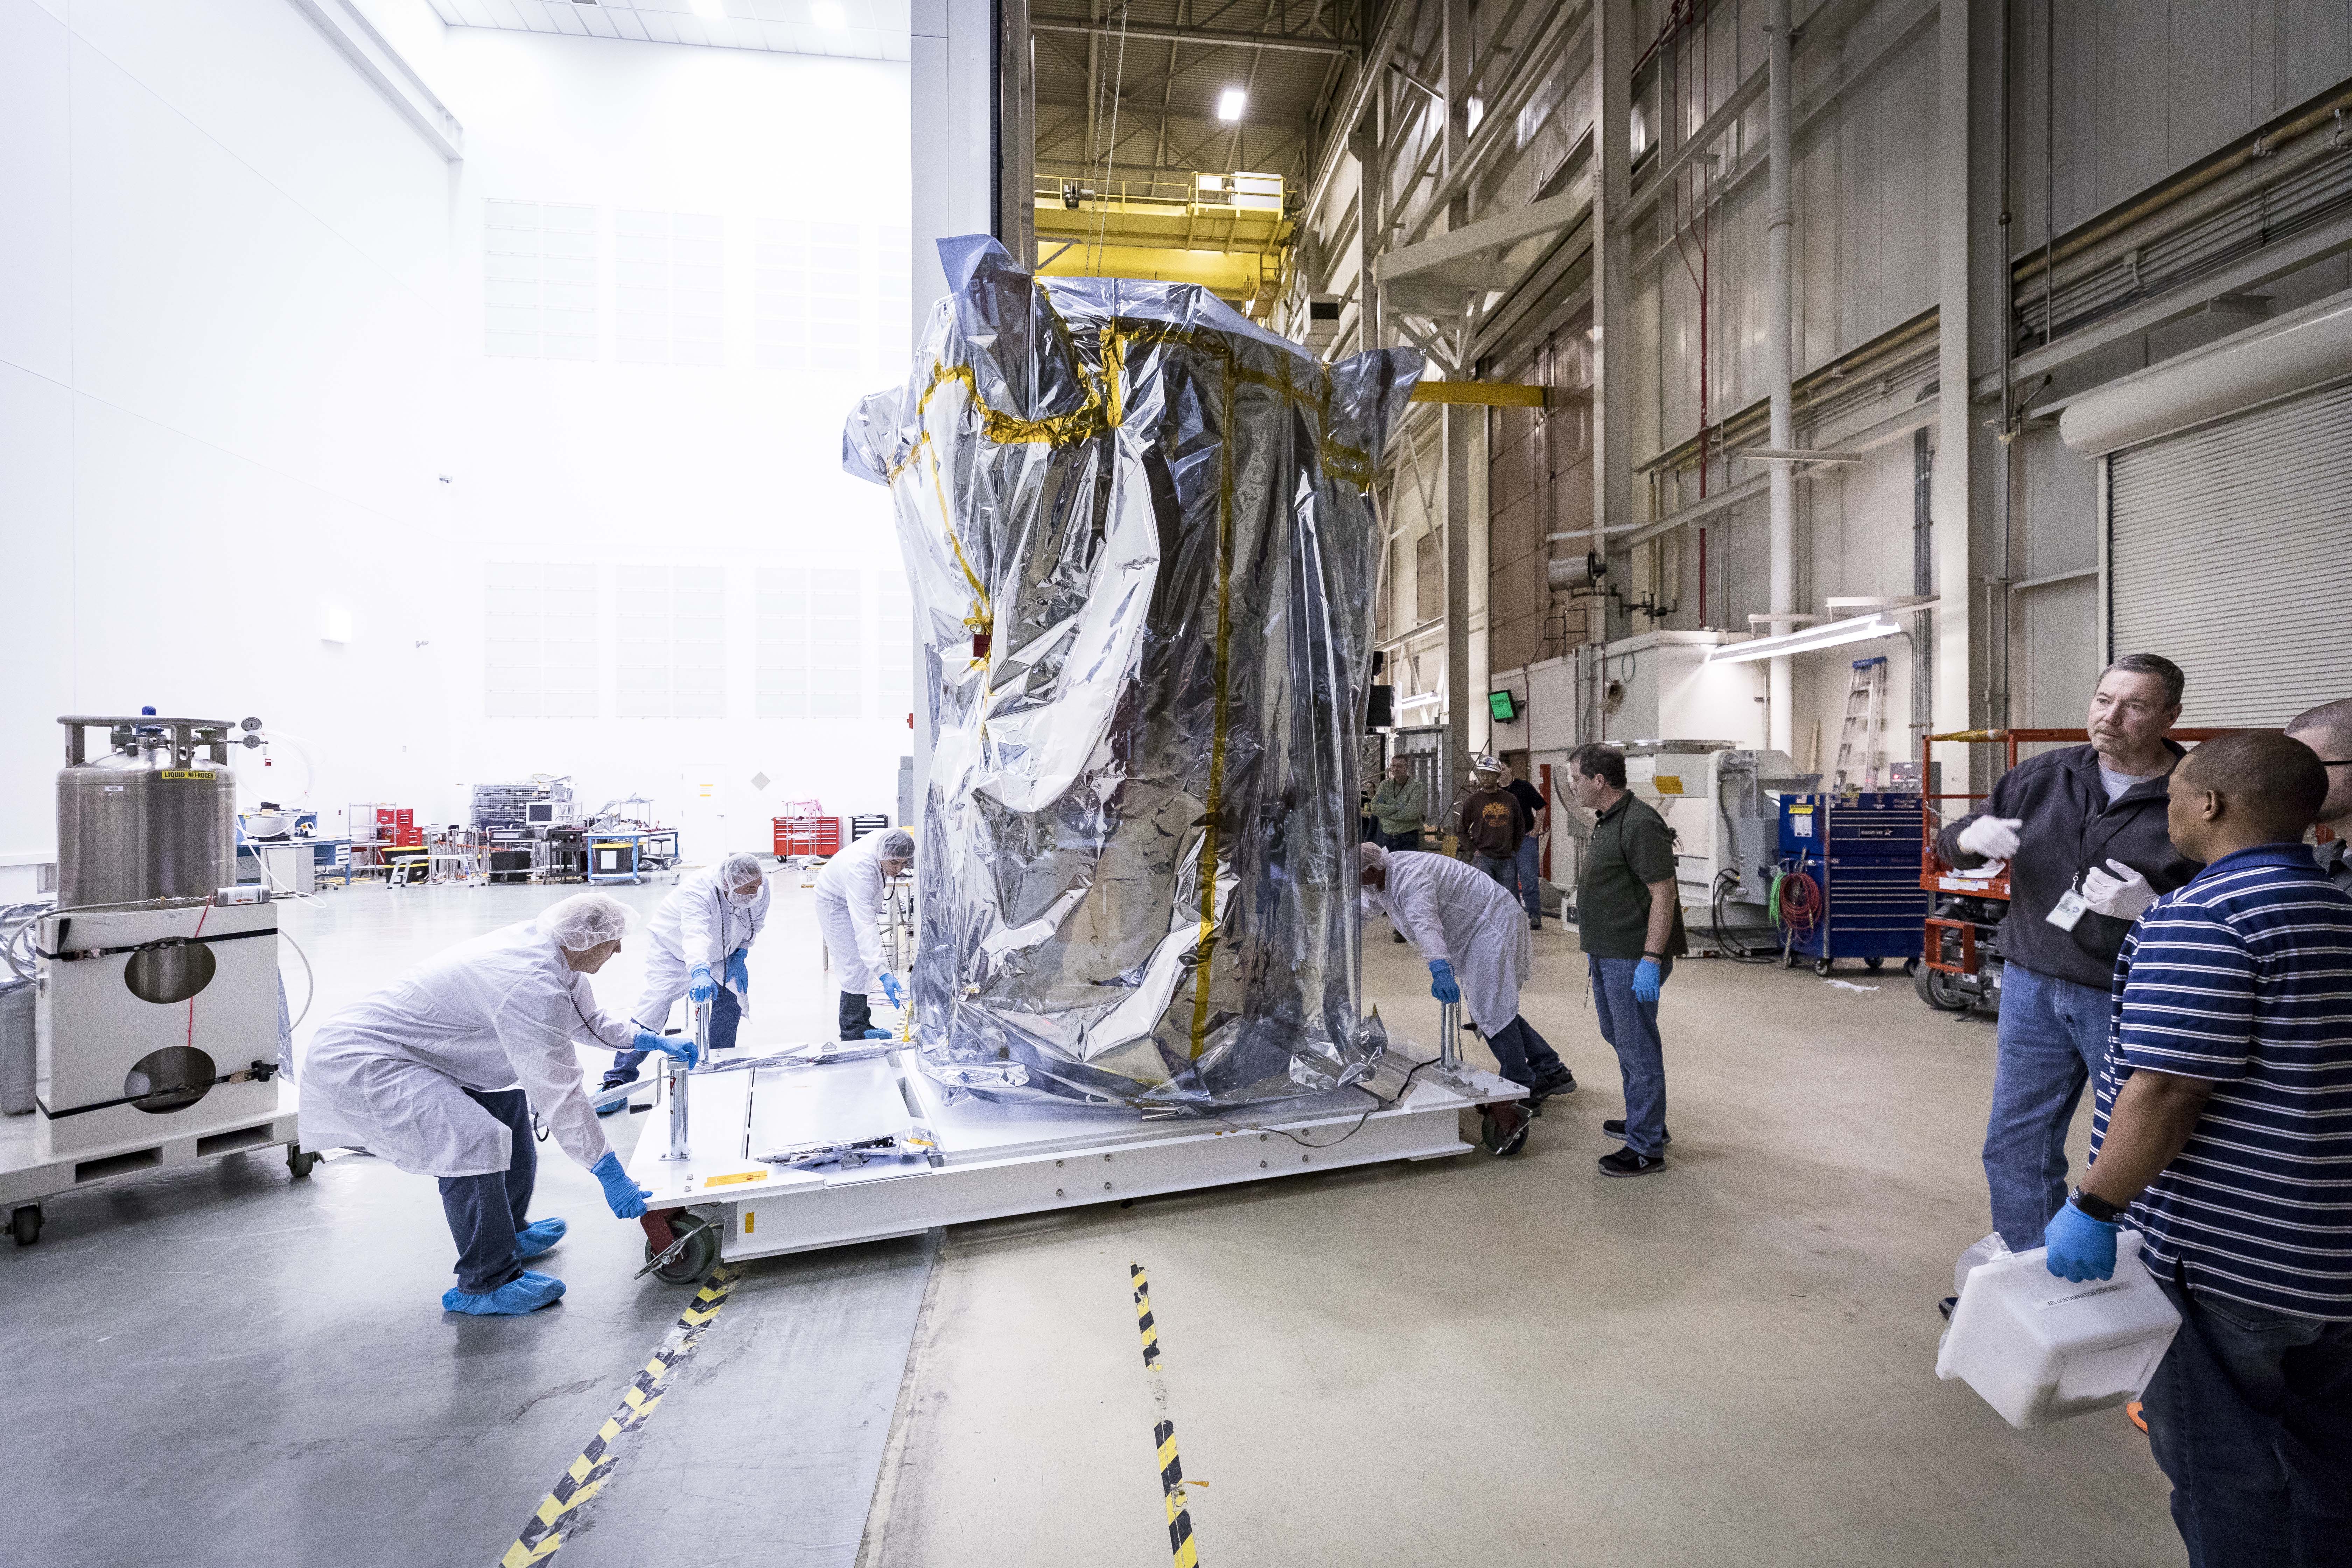 NASA’s Parker Solar Probe is wheeled into a clean room at NASA’s Goddard Space Flight Center in Greenbelt, Maryland, on March 24, 2018, after successfully completing space environment testing to verify the spacecraft is ready for operations in space. The probe will undergo about seven more days of testing outside the chamber, then travel to Florida for a scheduled launch on July 31, 2018, from NASA’s Kennedy Space Center in Cape Canaveral.